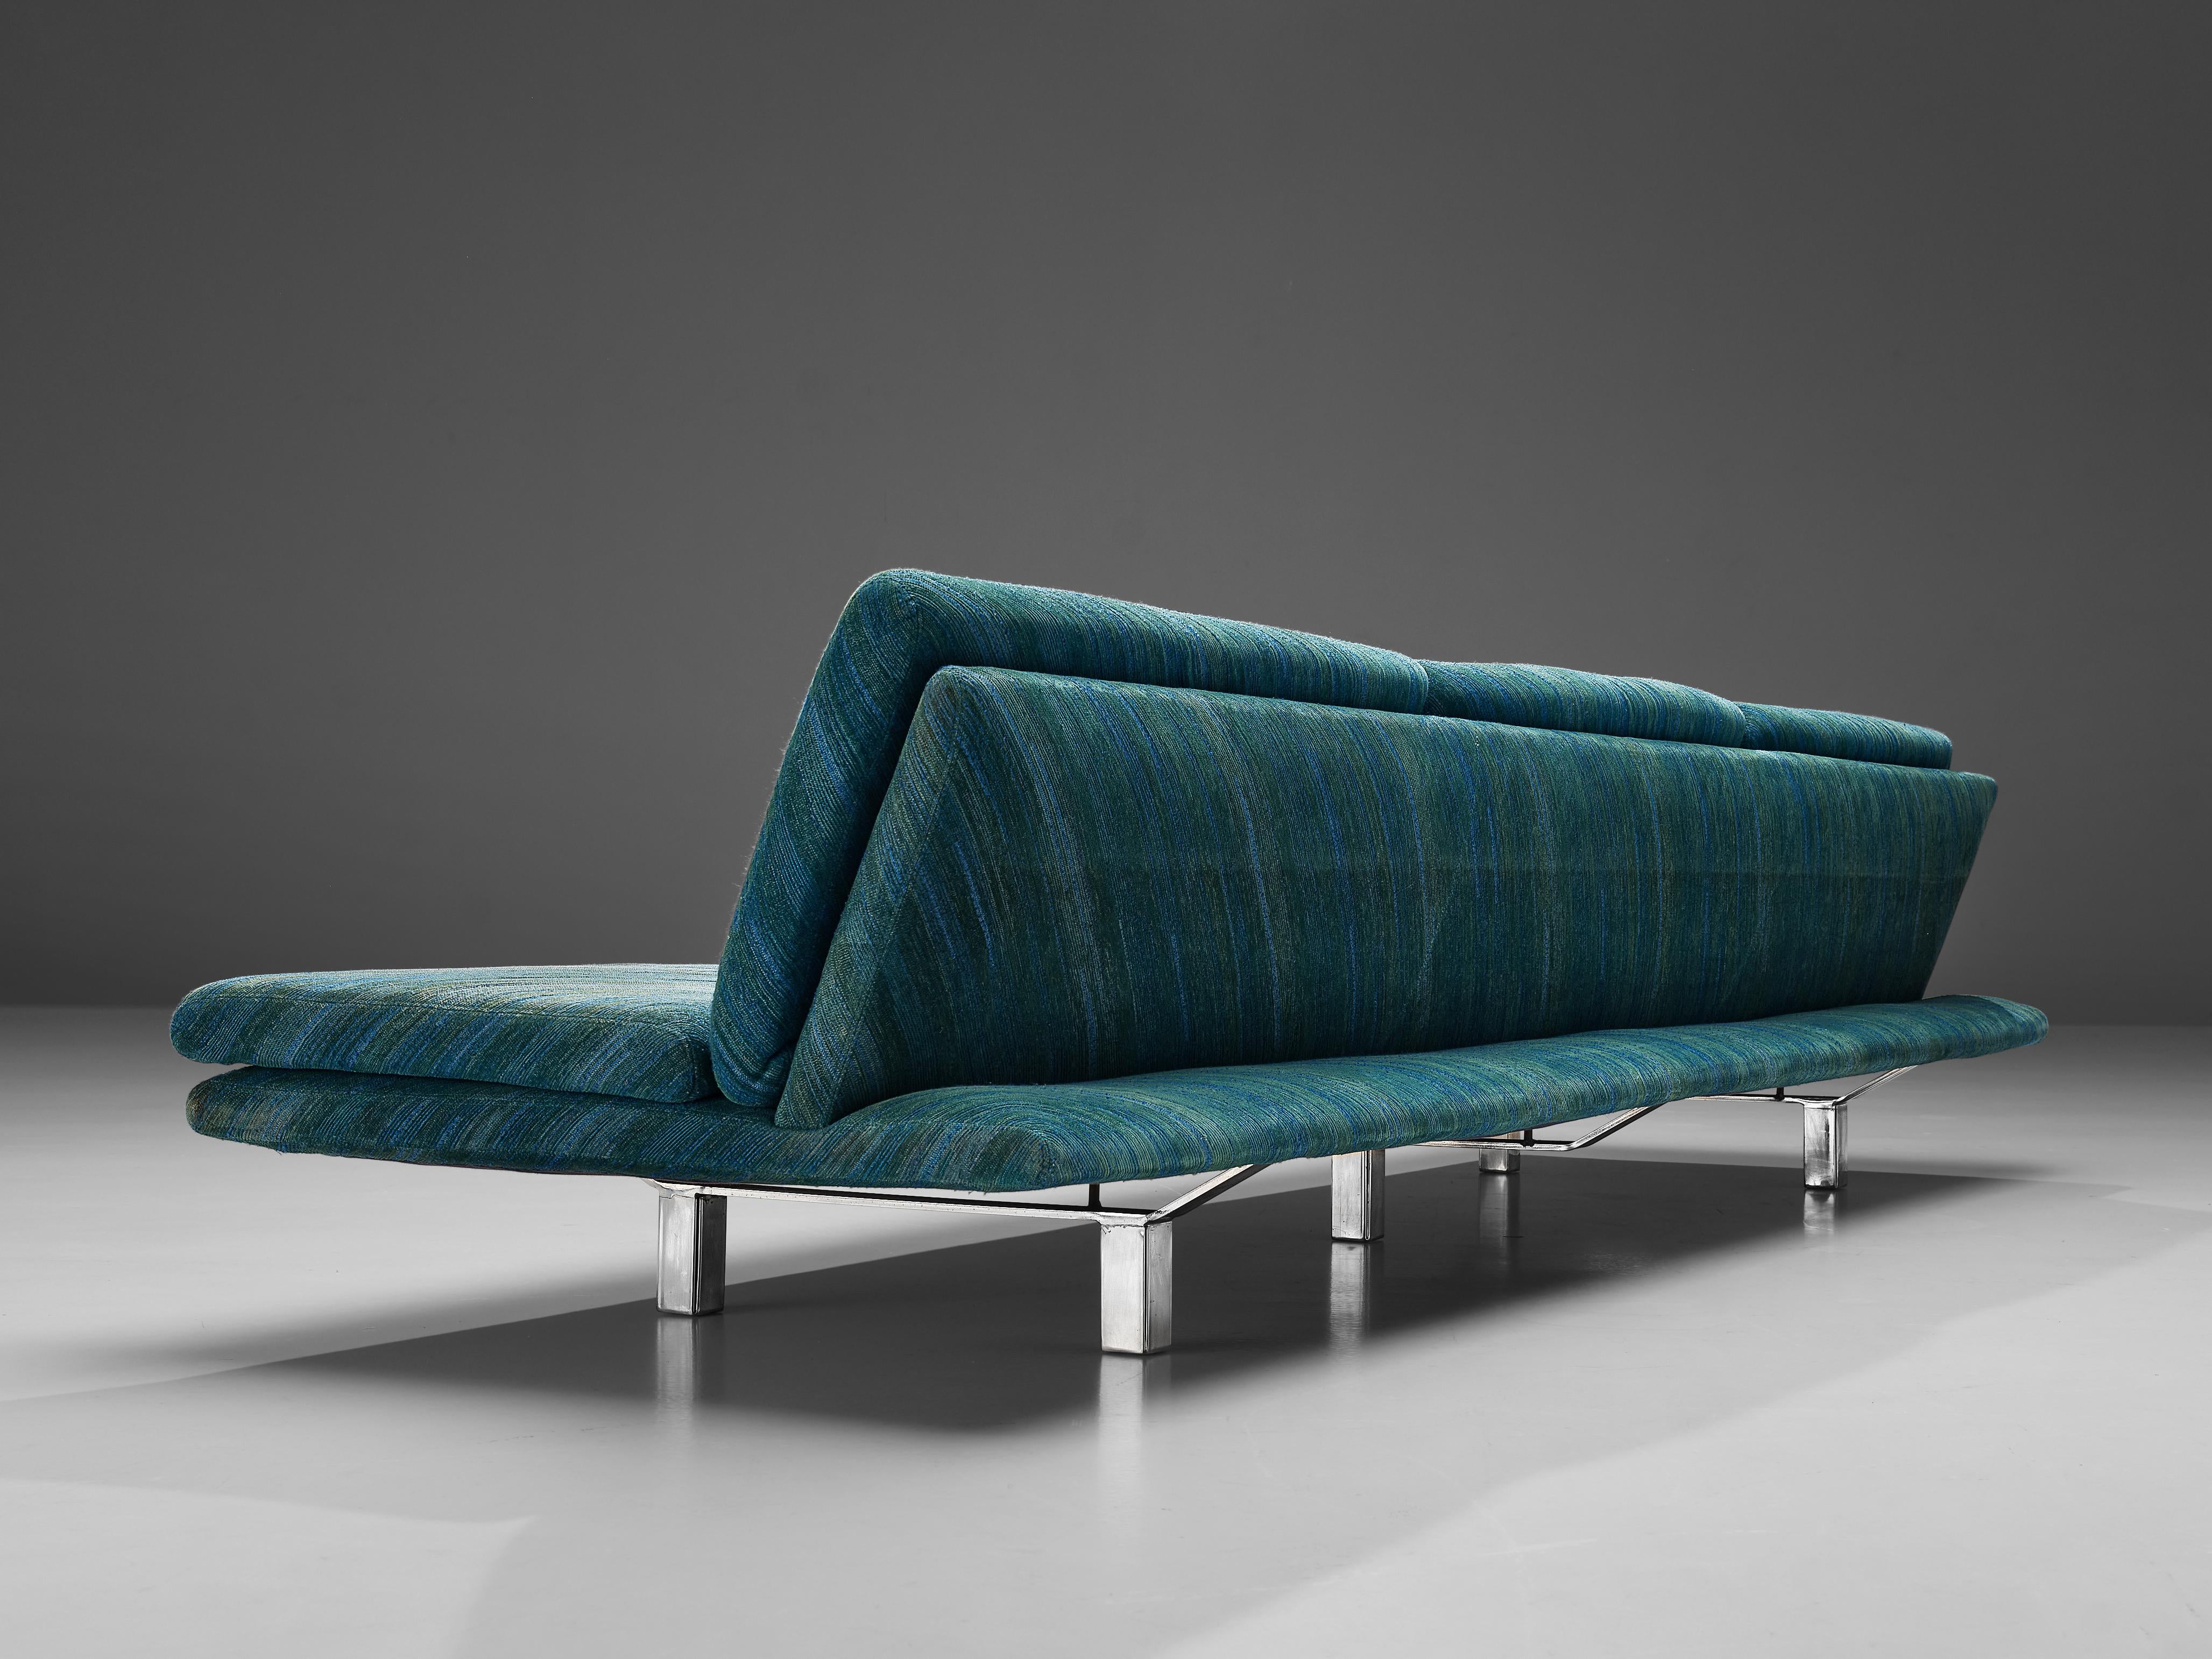 Saporiti Large Sofa in Green-Blue Patterned Upholstery